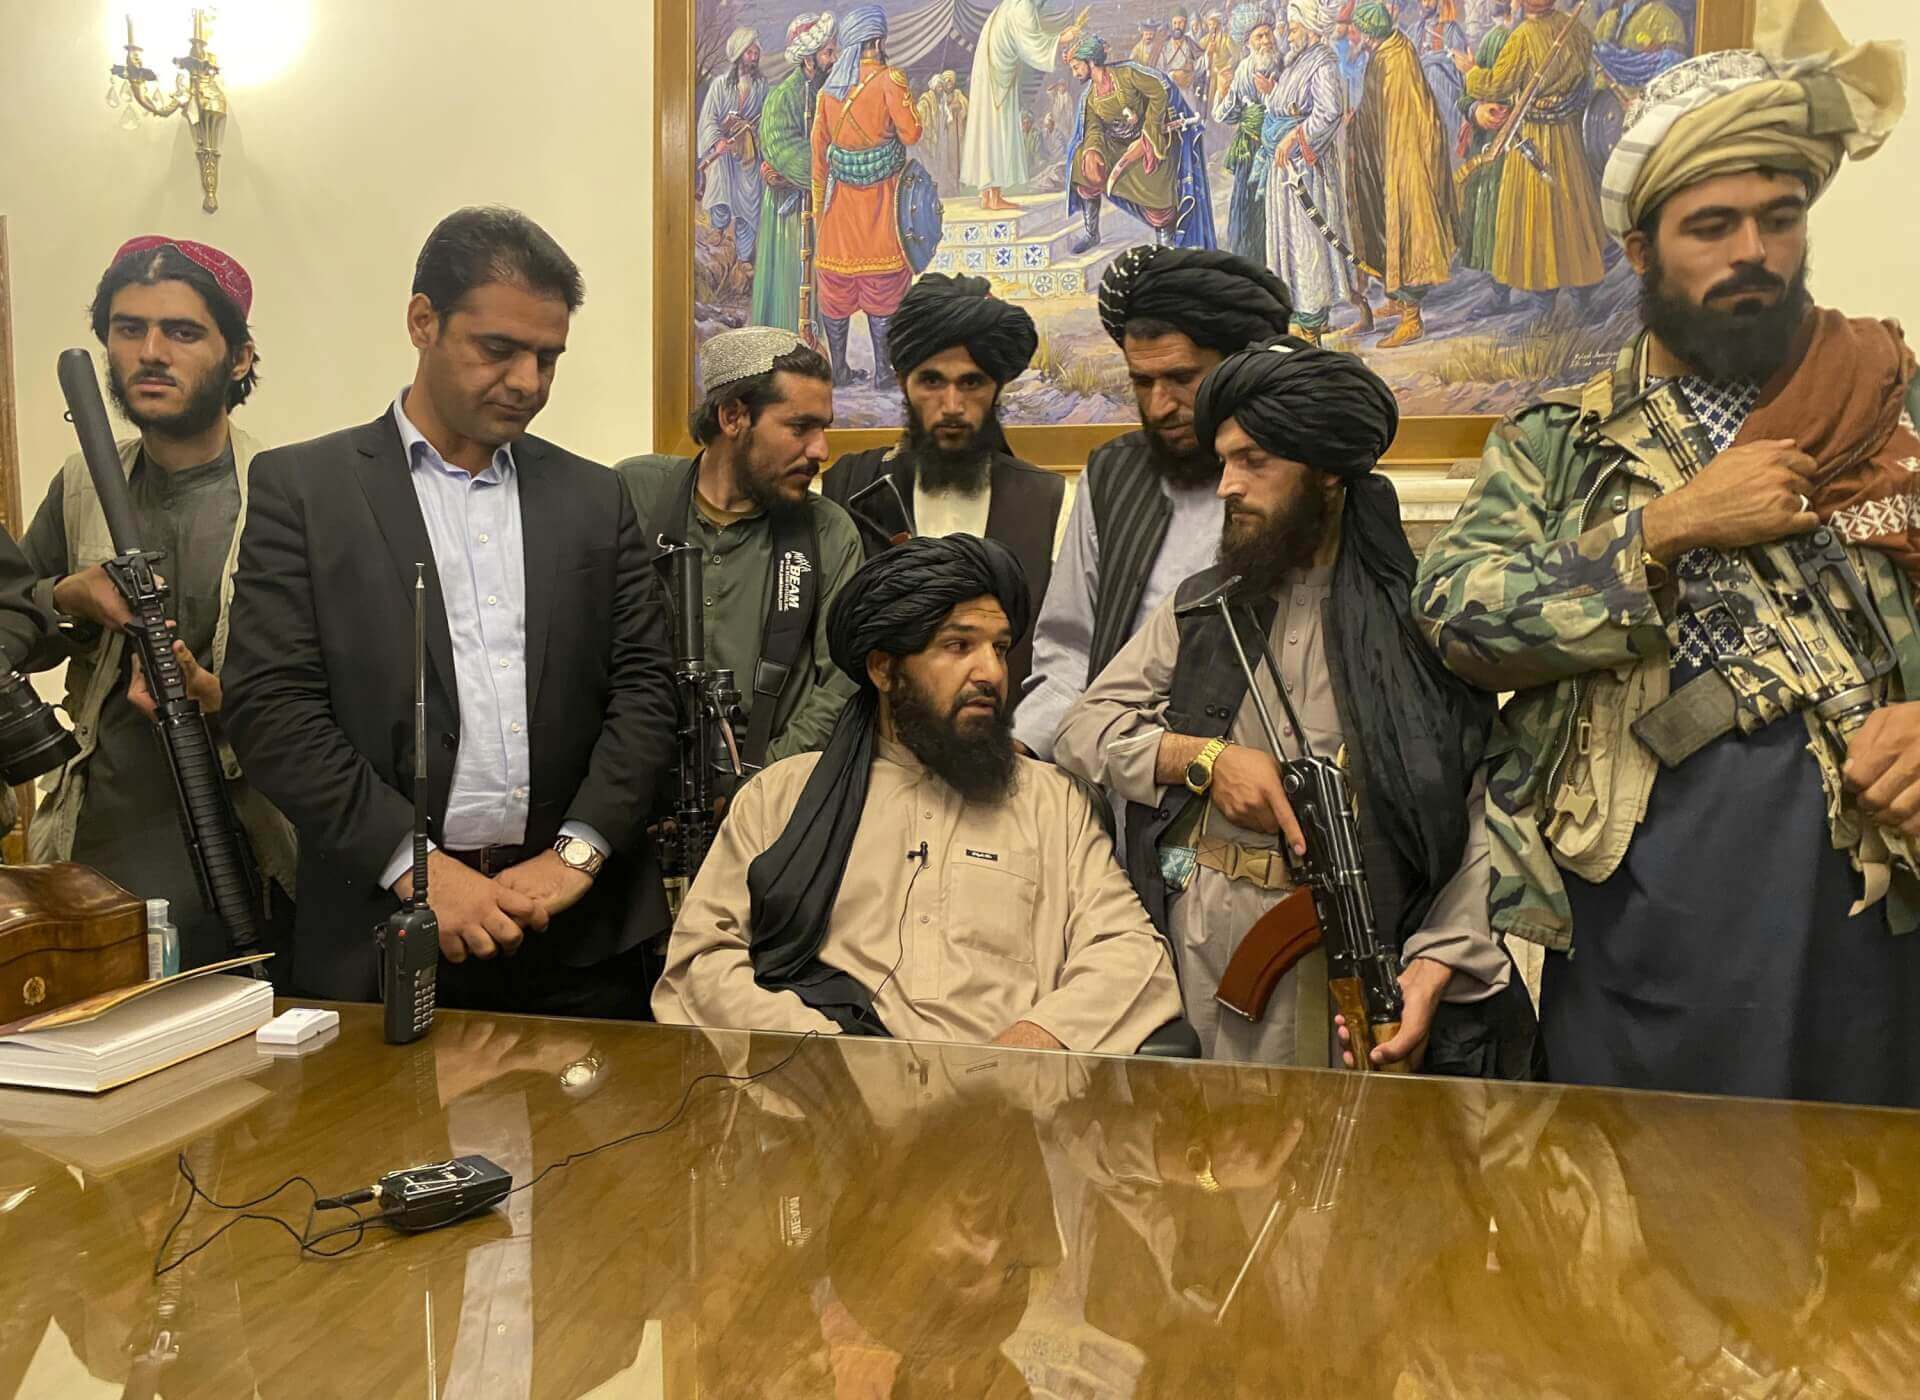 The Taliban Has No Interest in Gaining International Recognition